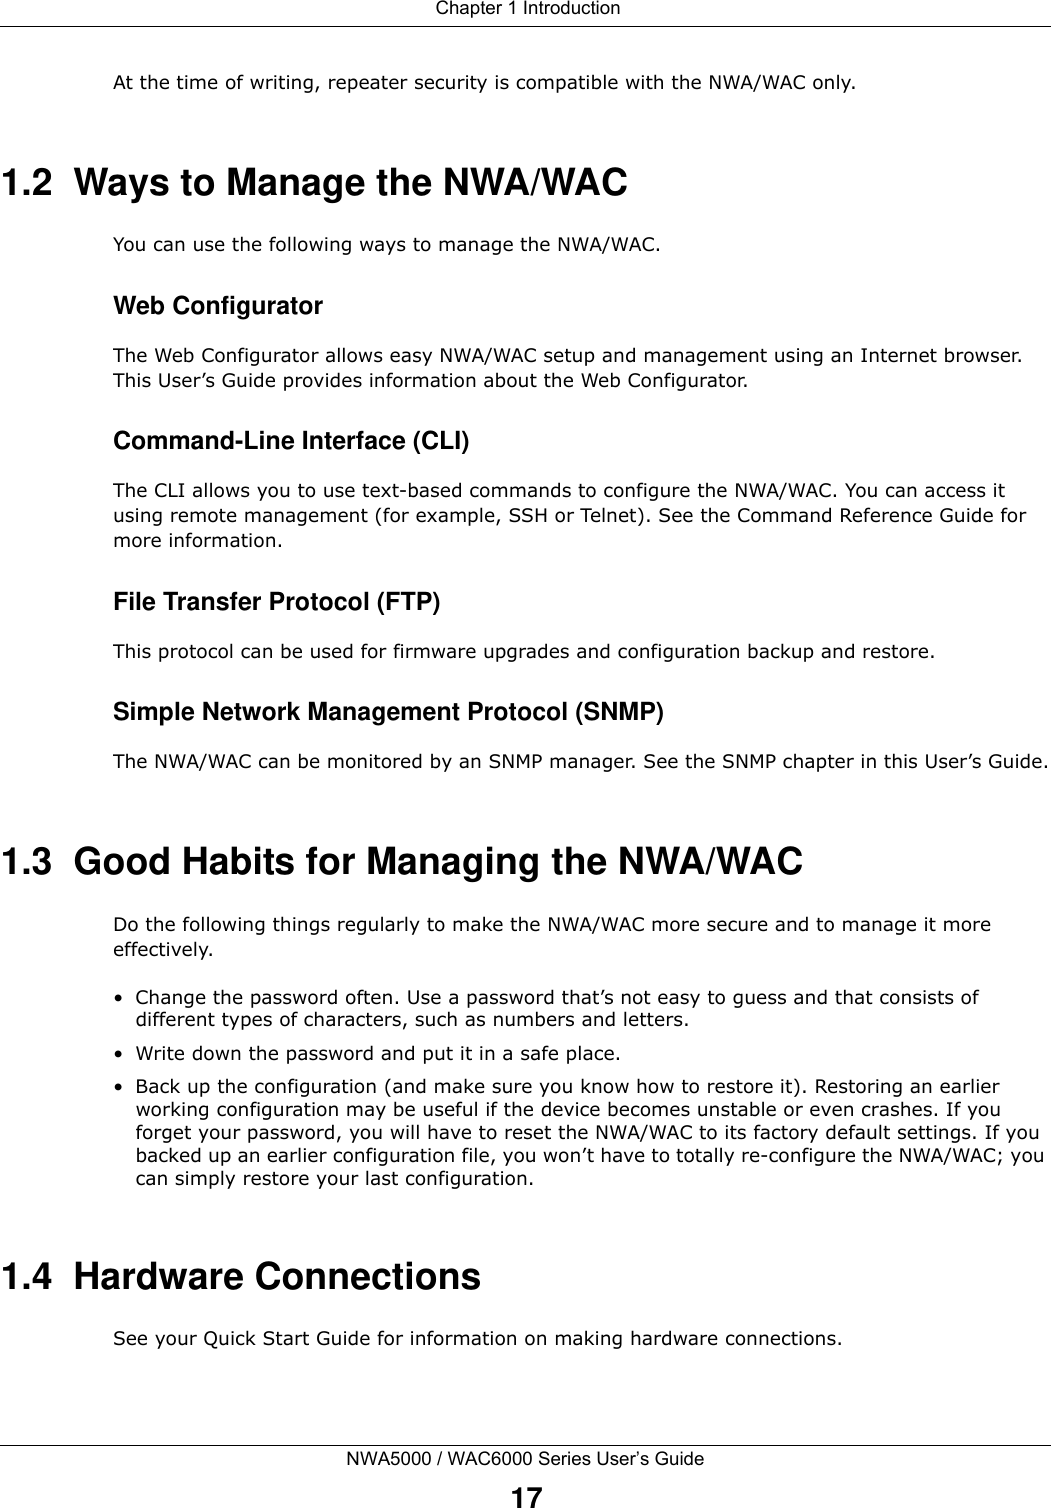  Chapter 1 IntroductionNWA5000 / WAC6000 Series User’s Guide17At the time of writing, repeater security is compatible with the NWA/WAC only. 1.2  Ways to Manage the NWA/WACYou can use the following ways to manage the NWA/WAC.Web ConfiguratorThe Web Configurator allows easy NWA/WAC setup and management using an Internet browser. This User’s Guide provides information about the Web Configurator.Command-Line Interface (CLI)The CLI allows you to use text-based commands to configure the NWA/WAC. You can access it using remote management (for example, SSH or Telnet). See the Command Reference Guide for more information.File Transfer Protocol (FTP)This protocol can be used for firmware upgrades and configuration backup and restore.Simple Network Management Protocol (SNMP)The NWA/WAC can be monitored by an SNMP manager. See the SNMP chapter in this User’s Guide.1.3  Good Habits for Managing the NWA/WACDo the following things regularly to make the NWA/WAC more secure and to manage it more effectively.• Change the password often. Use a password that’s not easy to guess and that consists of different types of characters, such as numbers and letters.• Write down the password and put it in a safe place.• Back up the configuration (and make sure you know how to restore it). Restoring an earlier working configuration may be useful if the device becomes unstable or even crashes. If you forget your password, you will have to reset the NWA/WAC to its factory default settings. If you backed up an earlier configuration file, you won’t have to totally re-configure the NWA/WAC; you can simply restore your last configuration.1.4  Hardware ConnectionsSee your Quick Start Guide for information on making hardware connections.